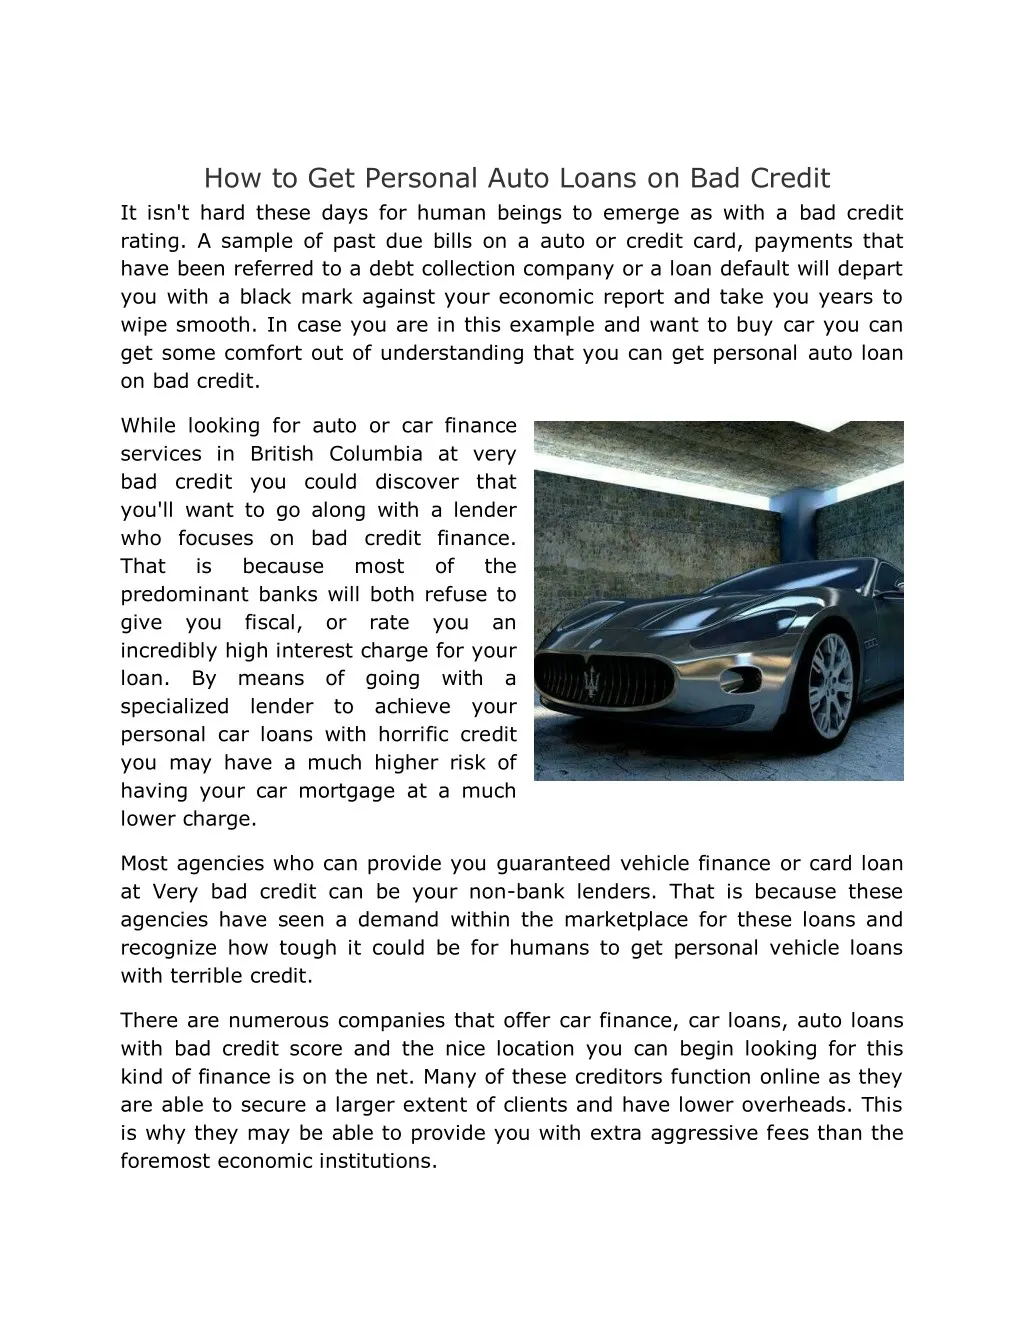 how to get personal auto loans on bad credit